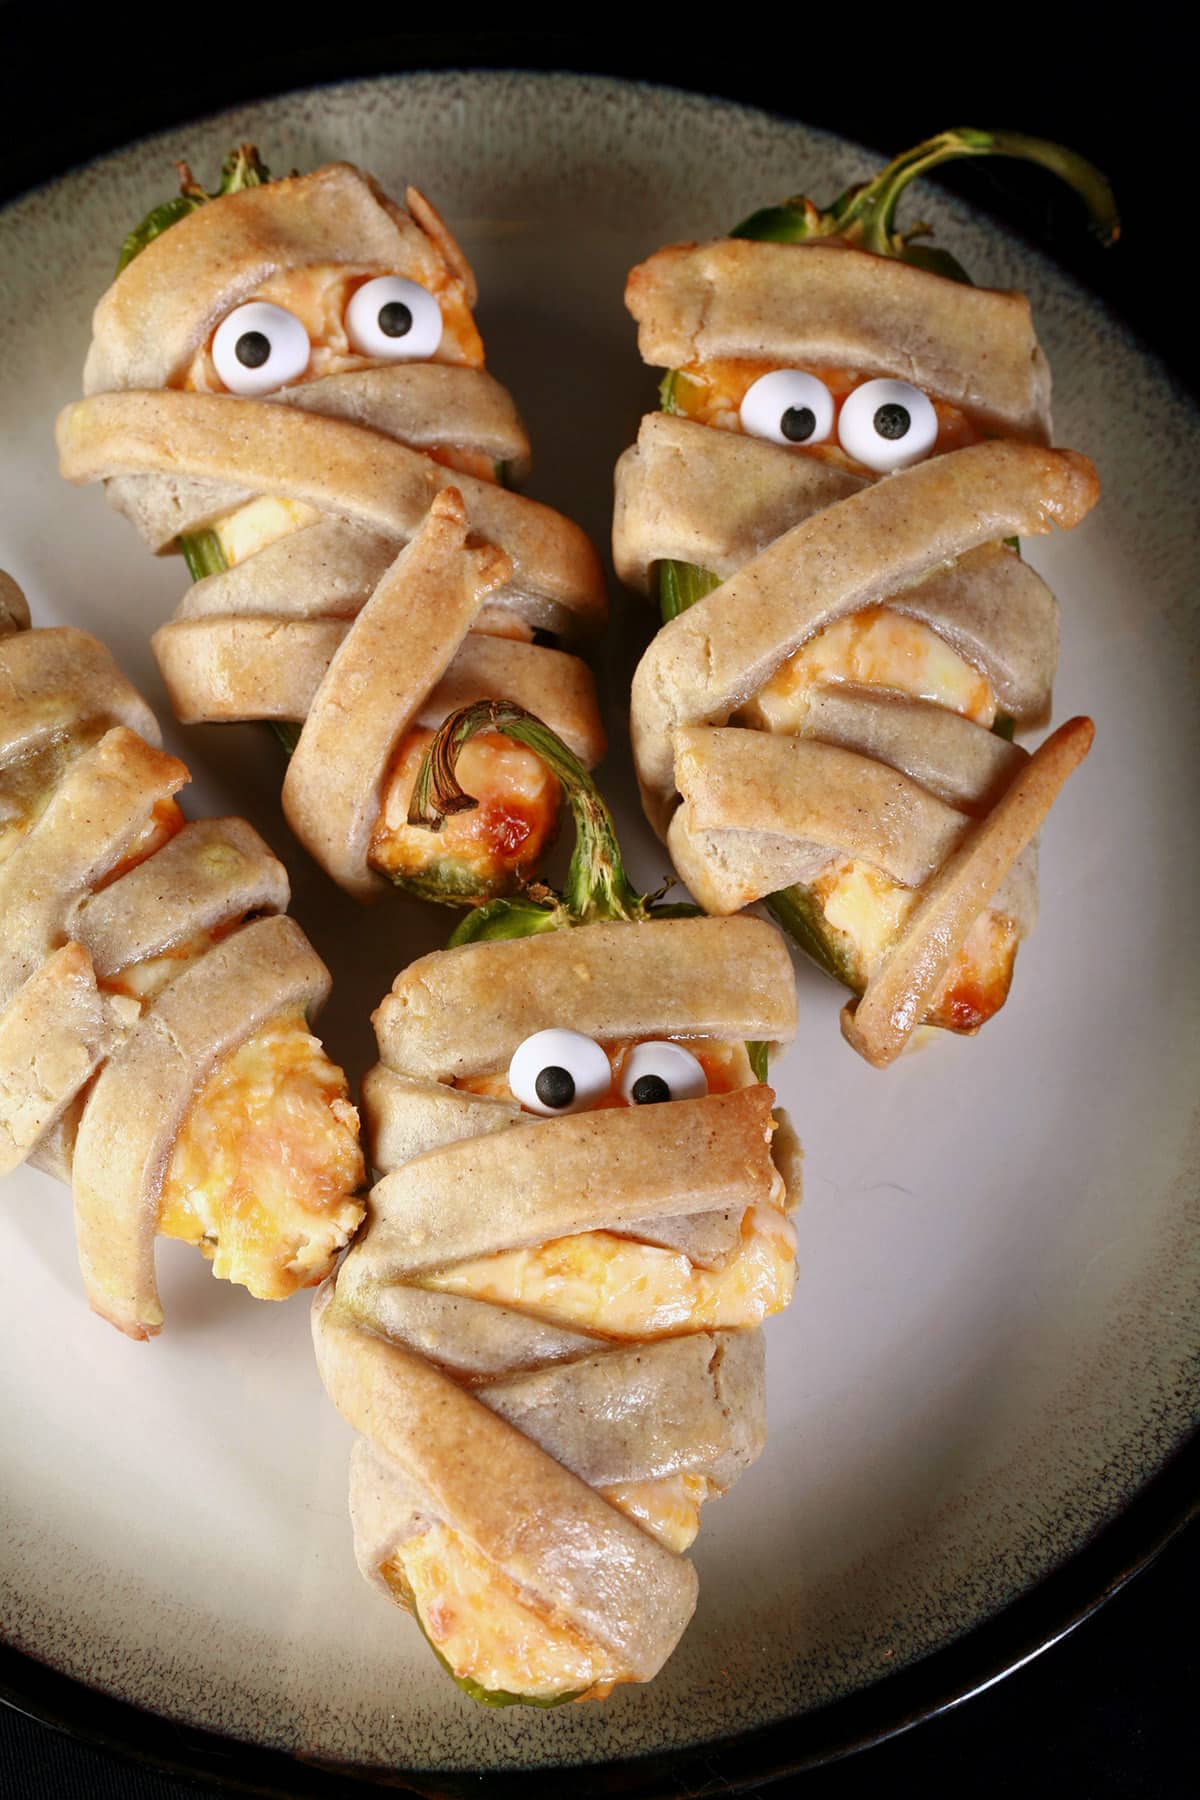 Several gluten free mummy jalapeno poppers on a plate. Each has 2 candy eyeballs.